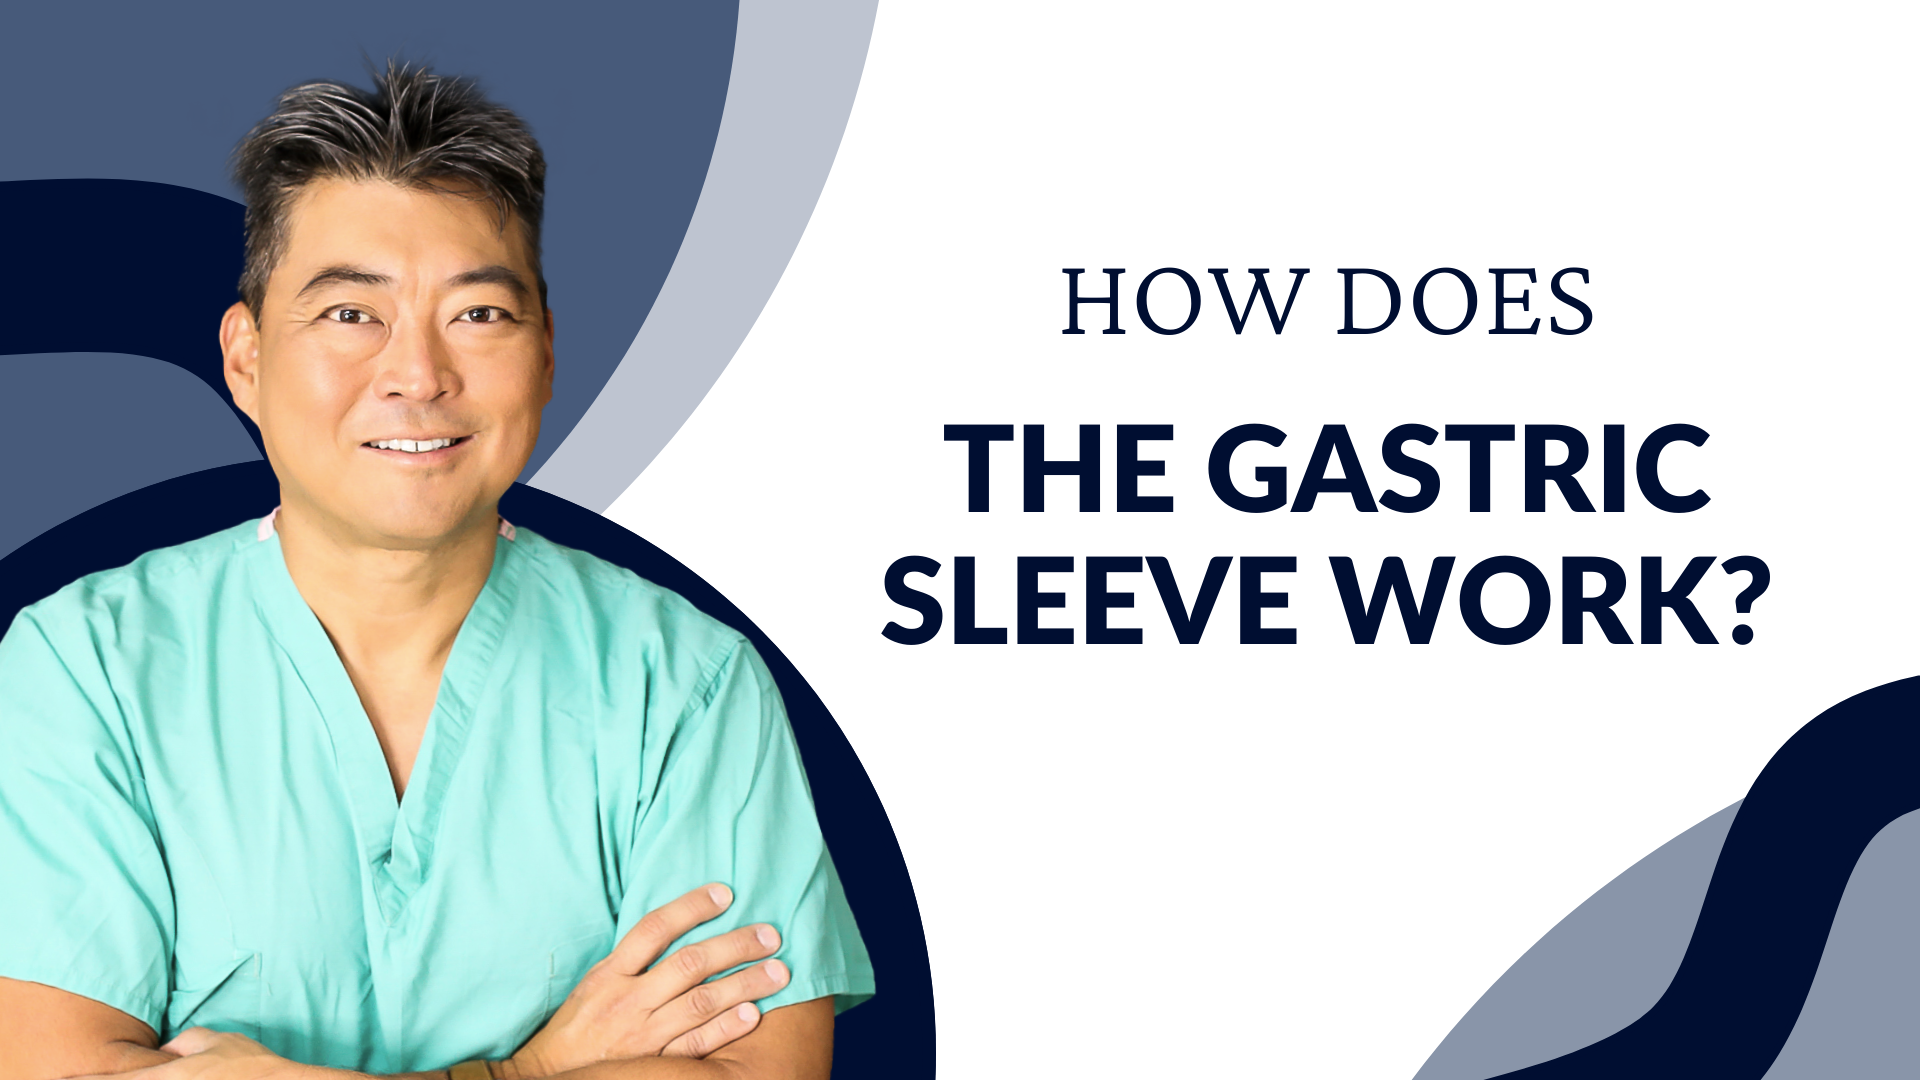 How Does the Gastric Sleeve Work